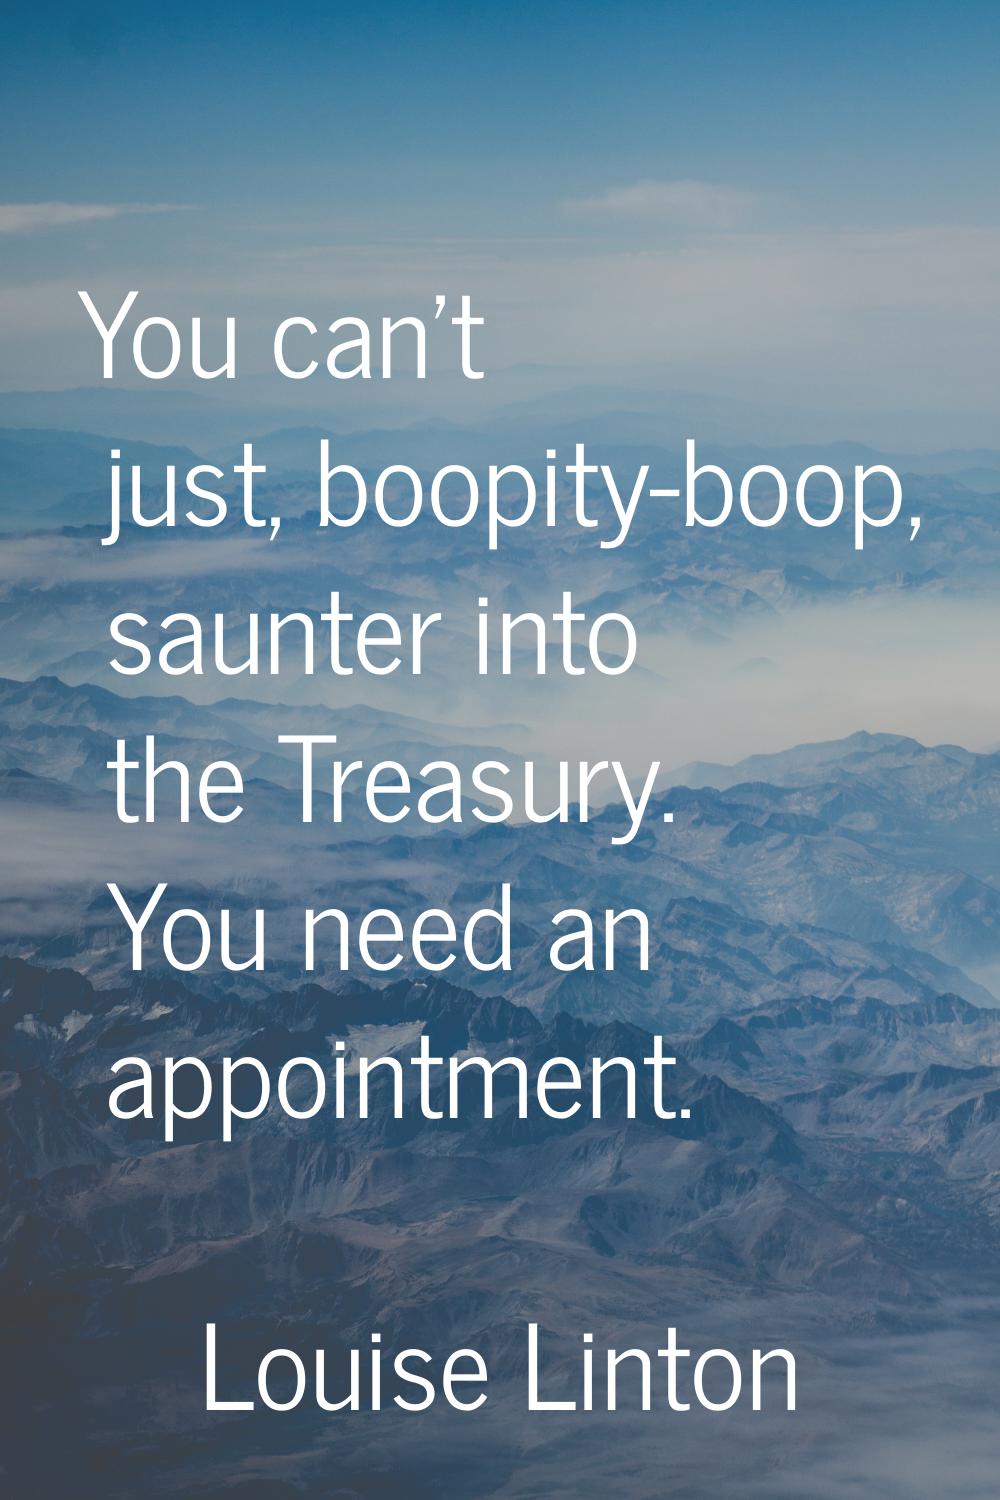 You can't just, boopity-boop, saunter into the Treasury. You need an appointment.